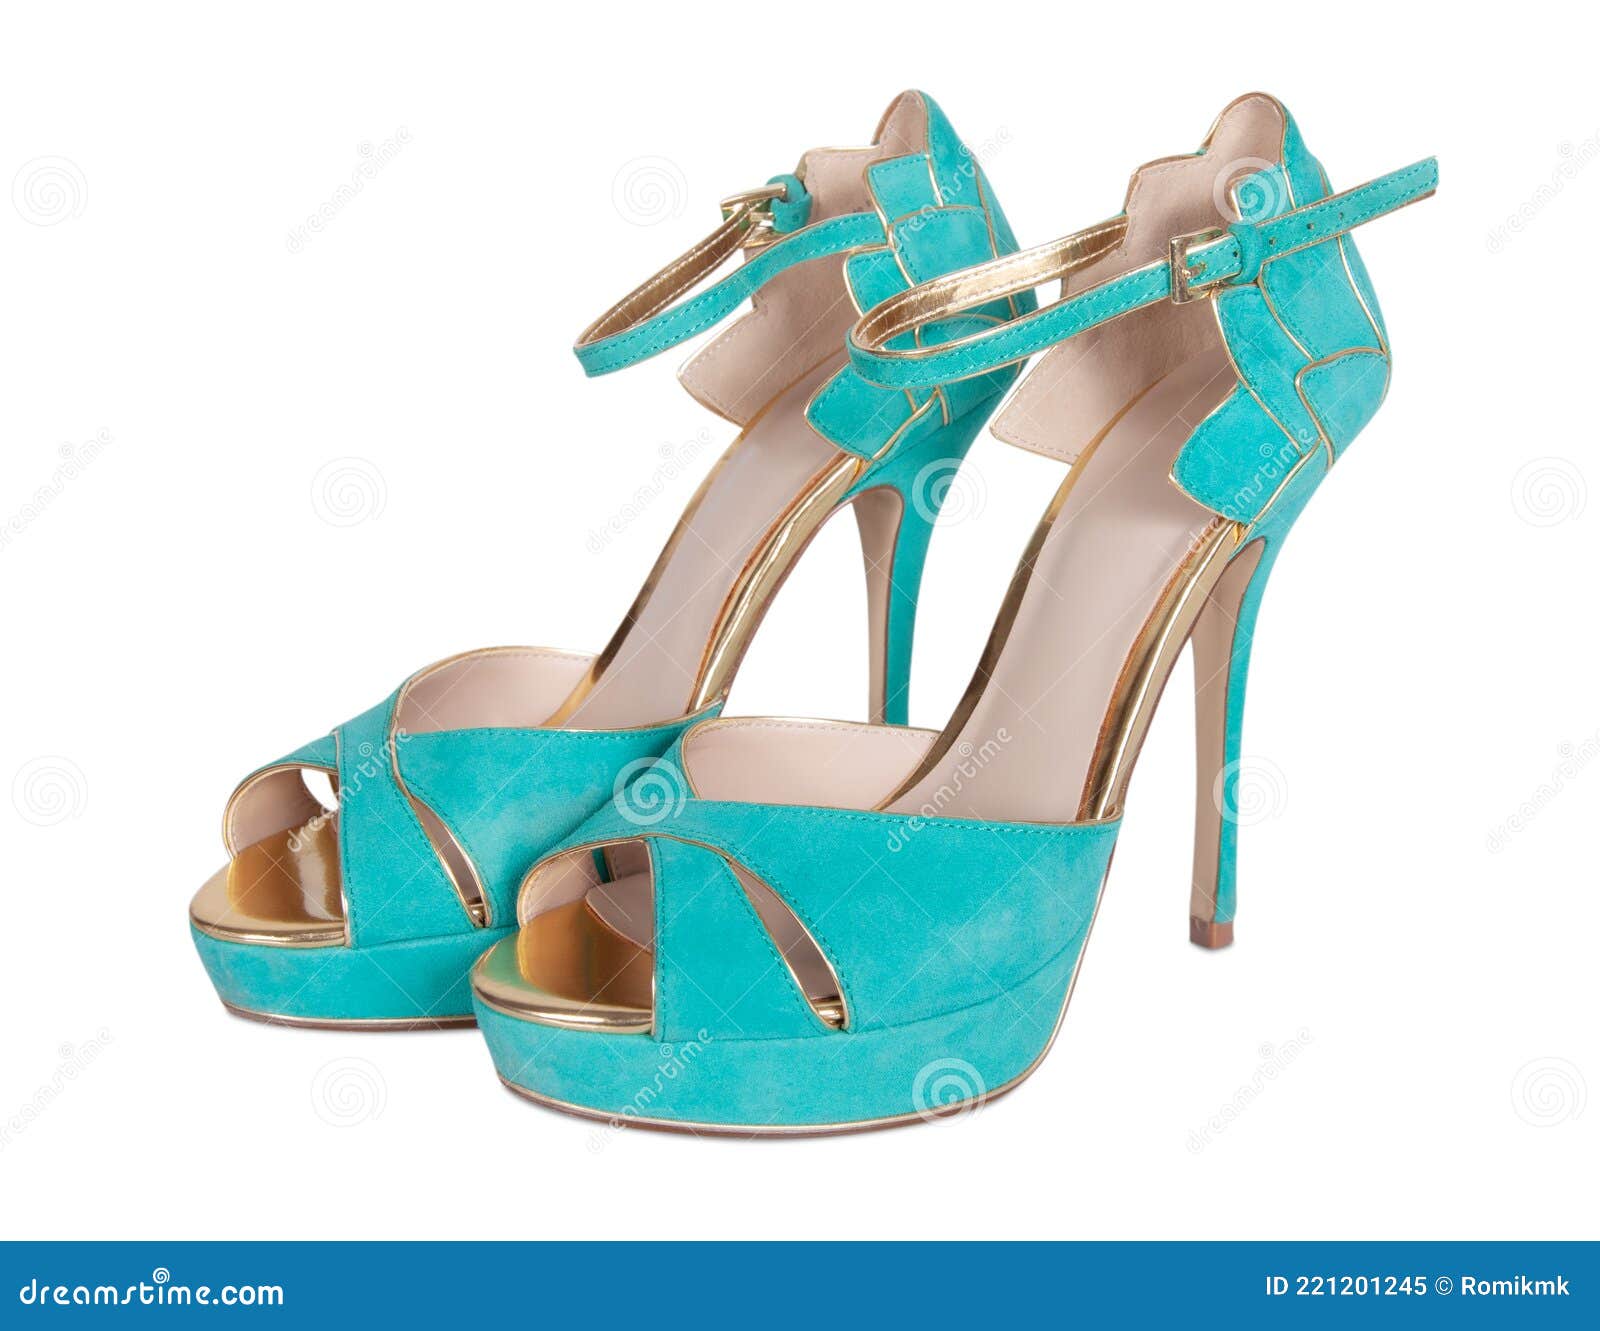 Pigalle leather heels Christian Louboutin Turquoise size 38 EU in Leather -  36457369